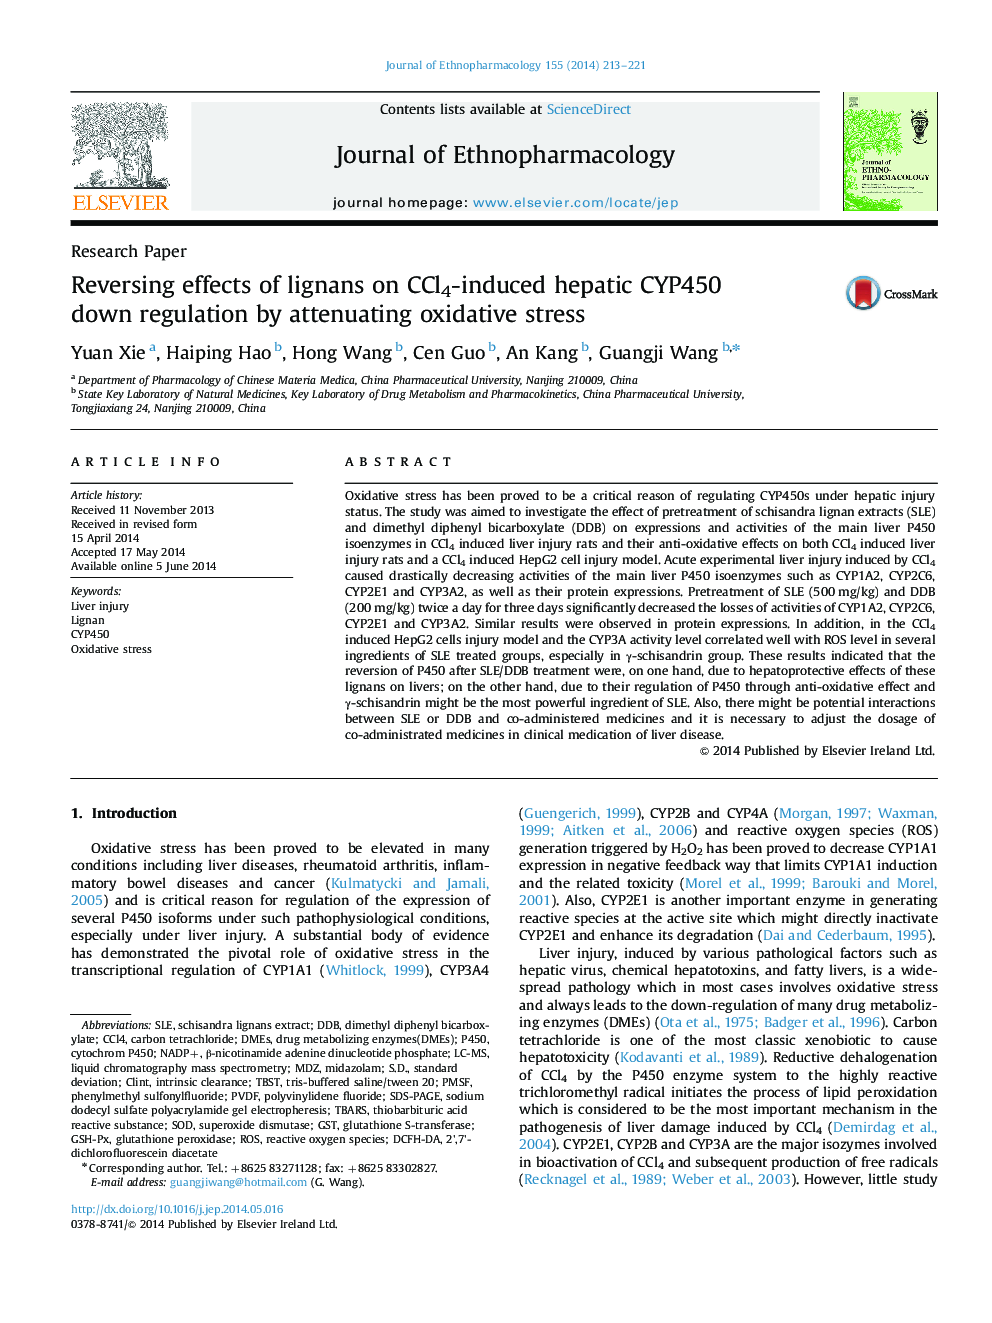 Research PaperReversing effects of lignans on CCl4-induced hepatic CYP450 down regulation by attenuating oxidative stress